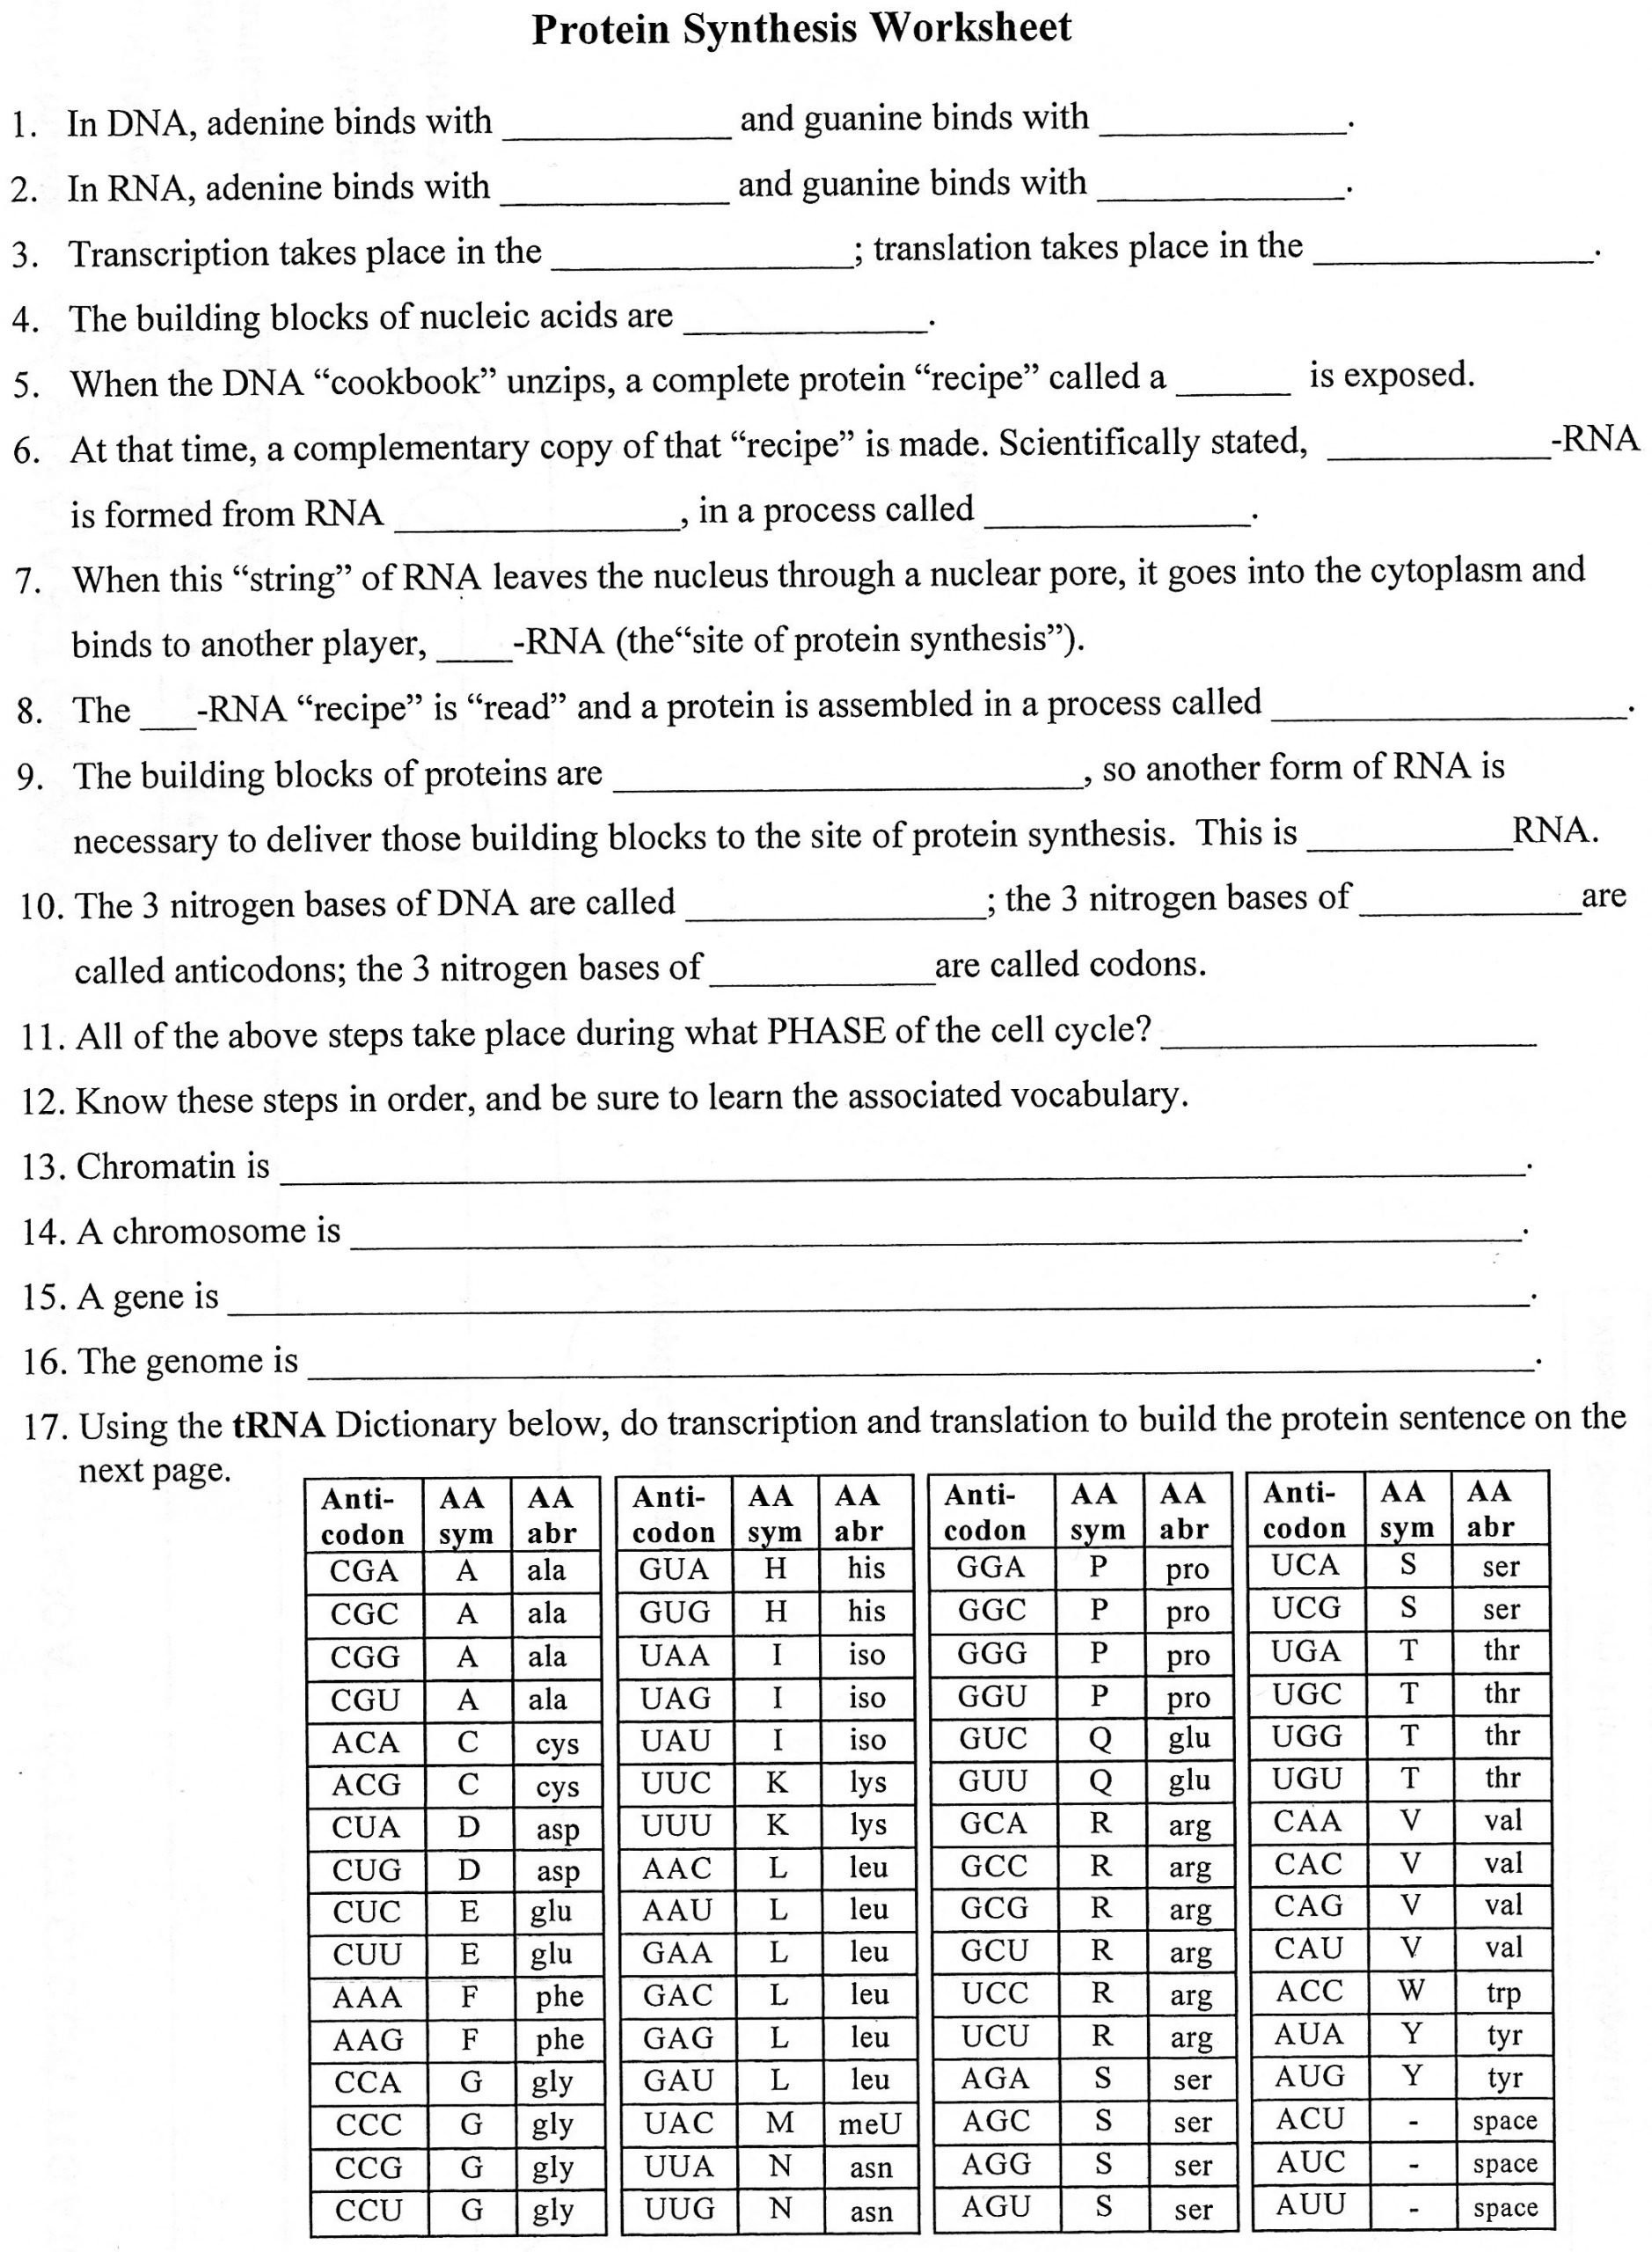 Protein Synthesis Review Worksheet Unit 4 Rna and Transcription Worksheet